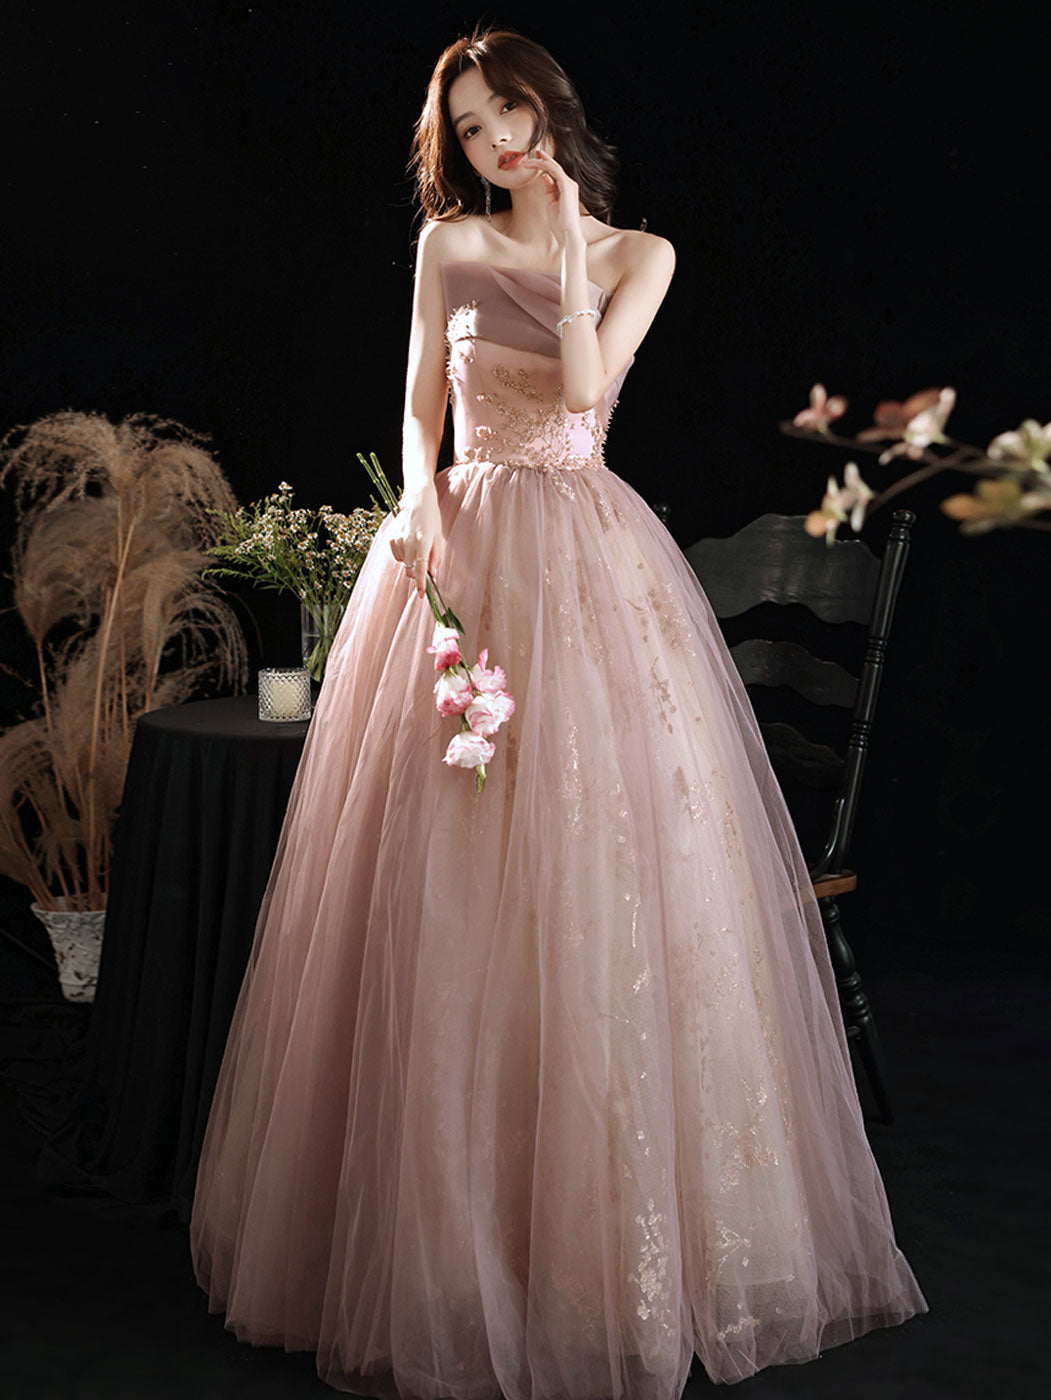 Aline Pink Long Prom Dress, Formal Pink Lace Graduation Dress with Sequin Lace Beading